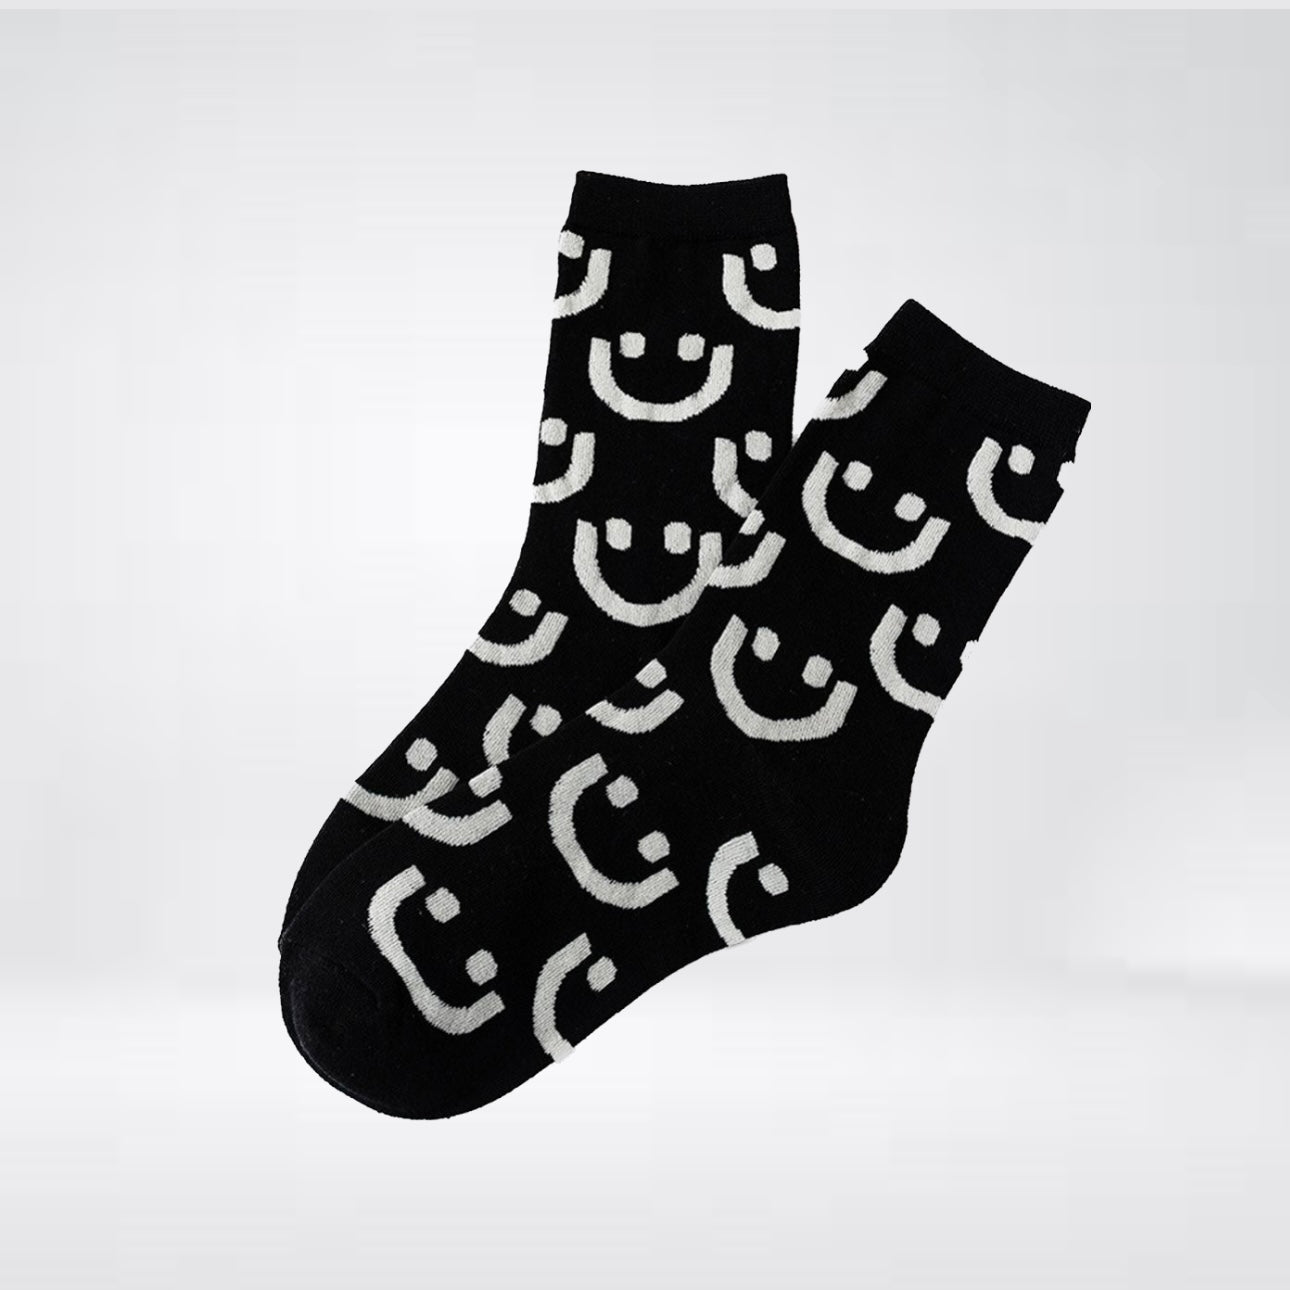 "Allover" socks in black with gray and white smileys